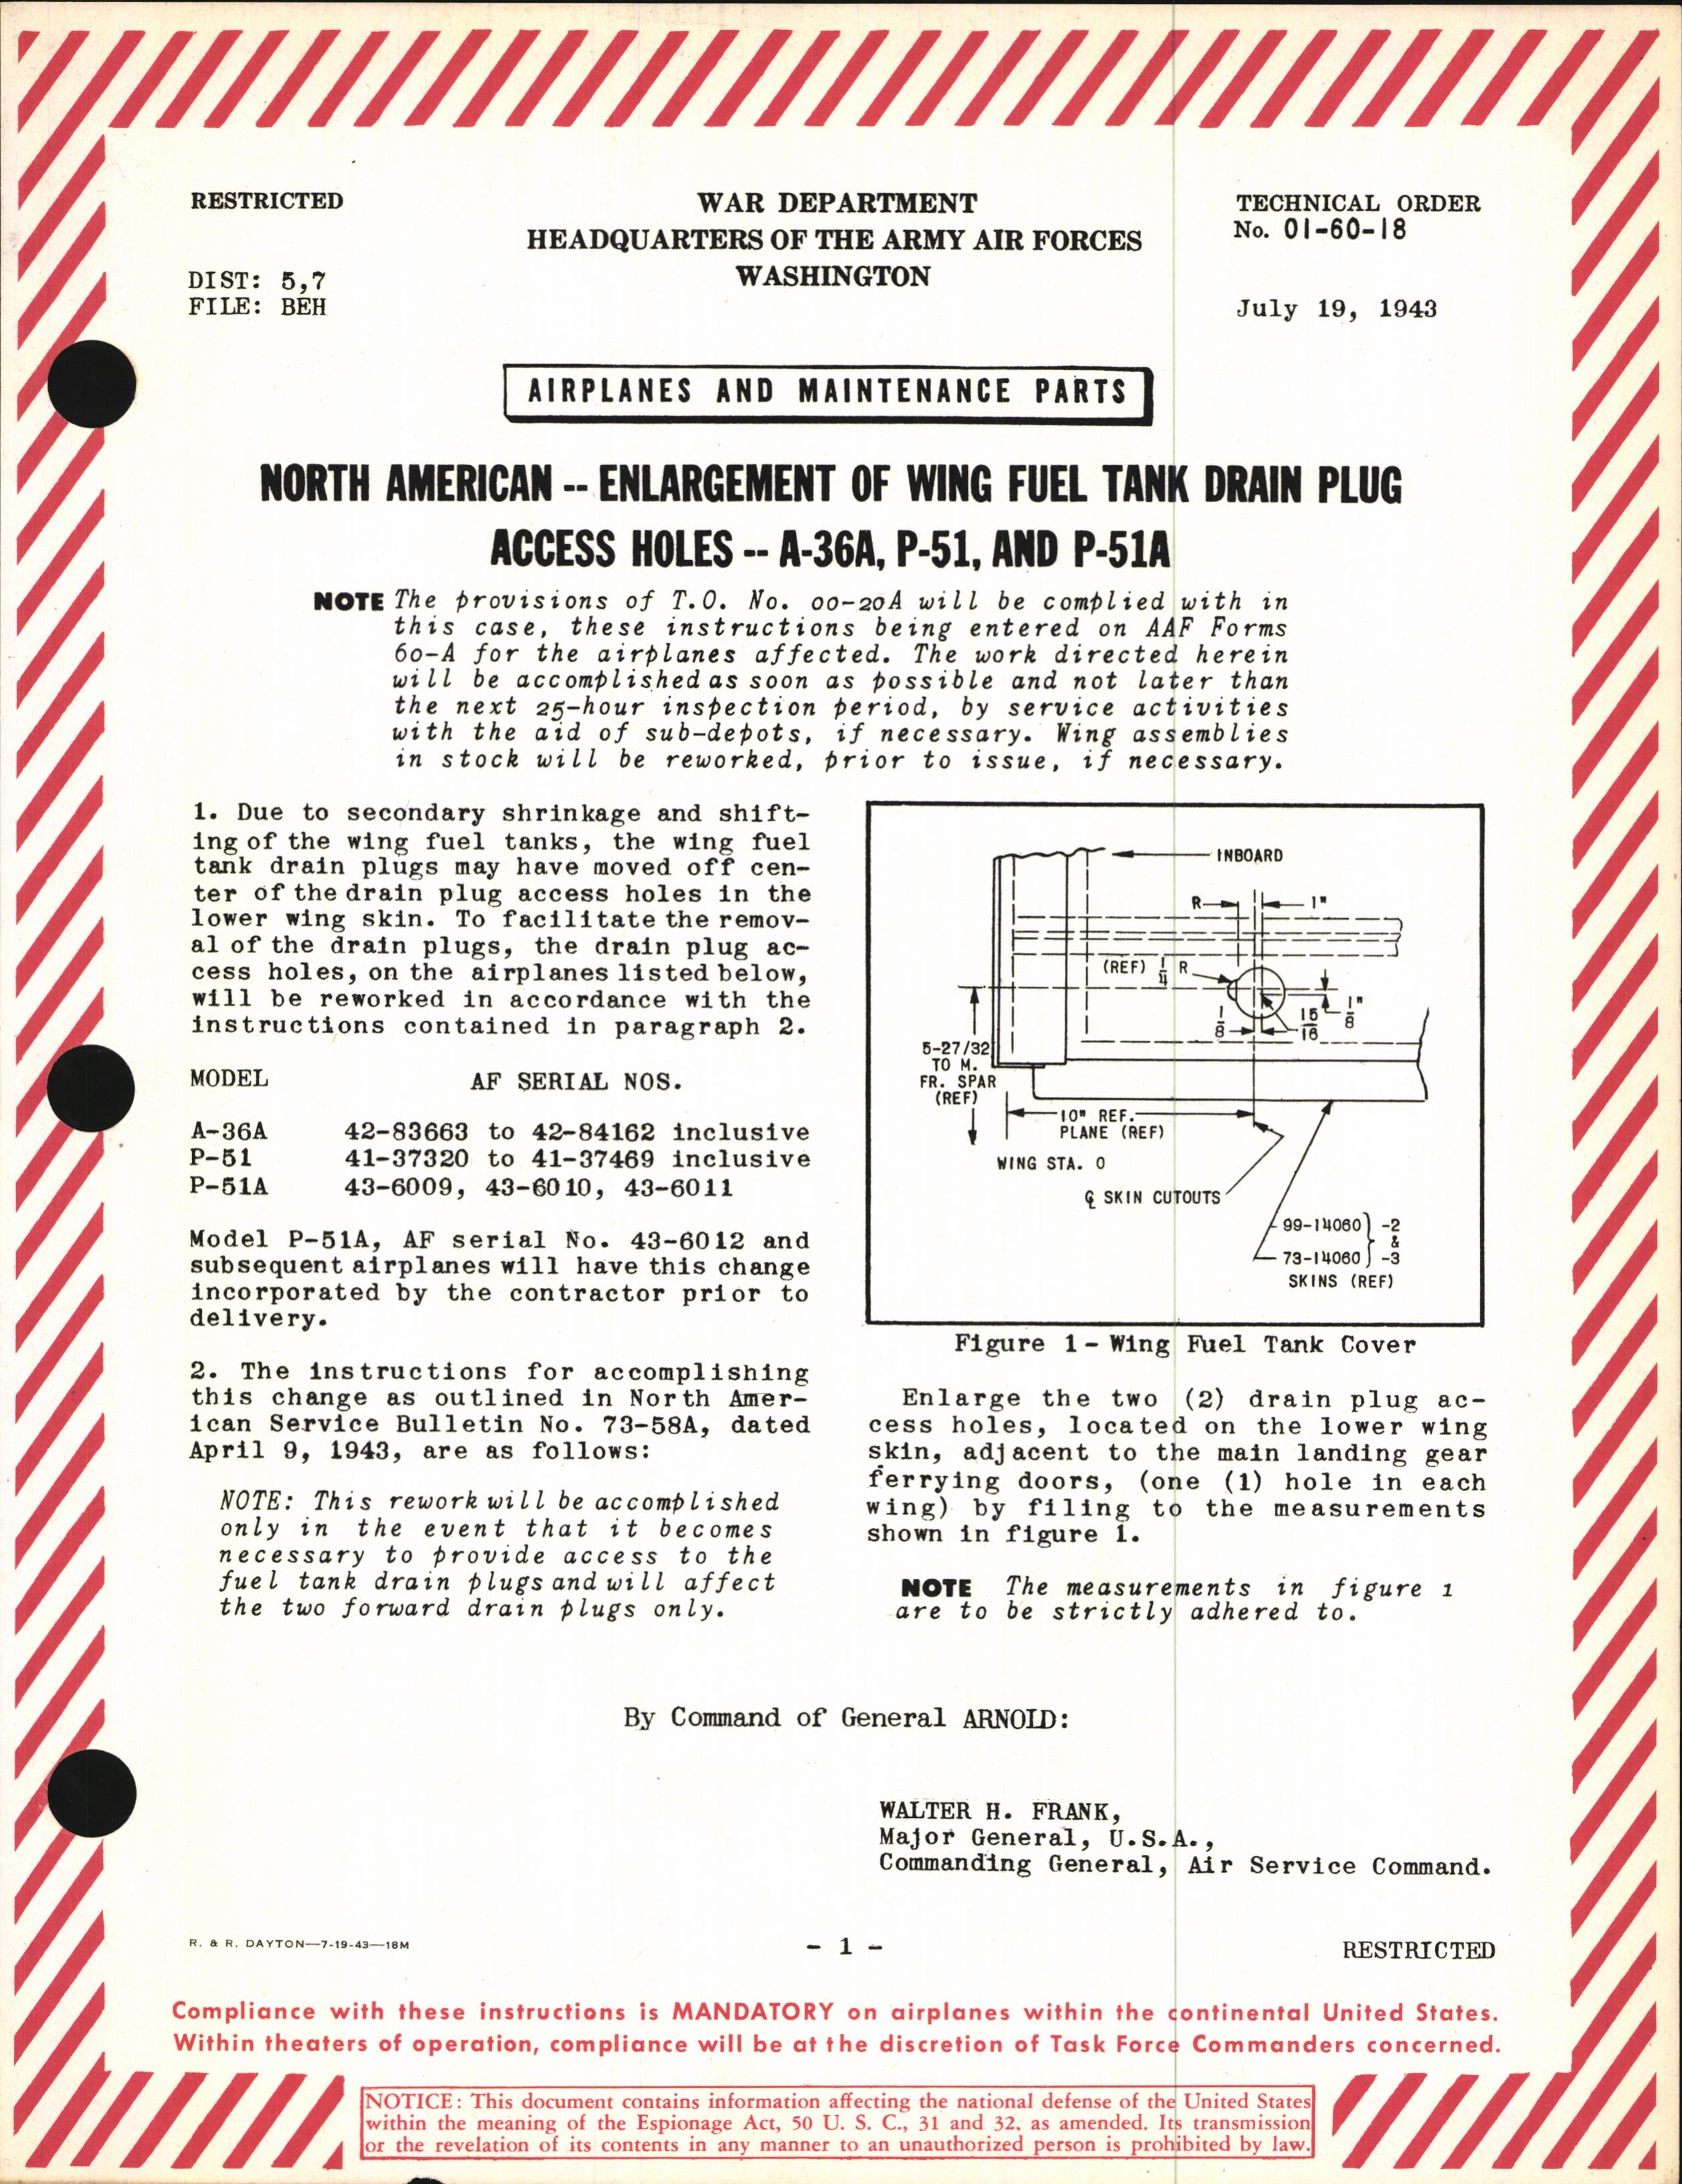 Sample page 1 from AirCorps Library document: Enlargement of Wing Fuel Tank Drain Plug Access Holes for A-36A, P-51, and P-51A